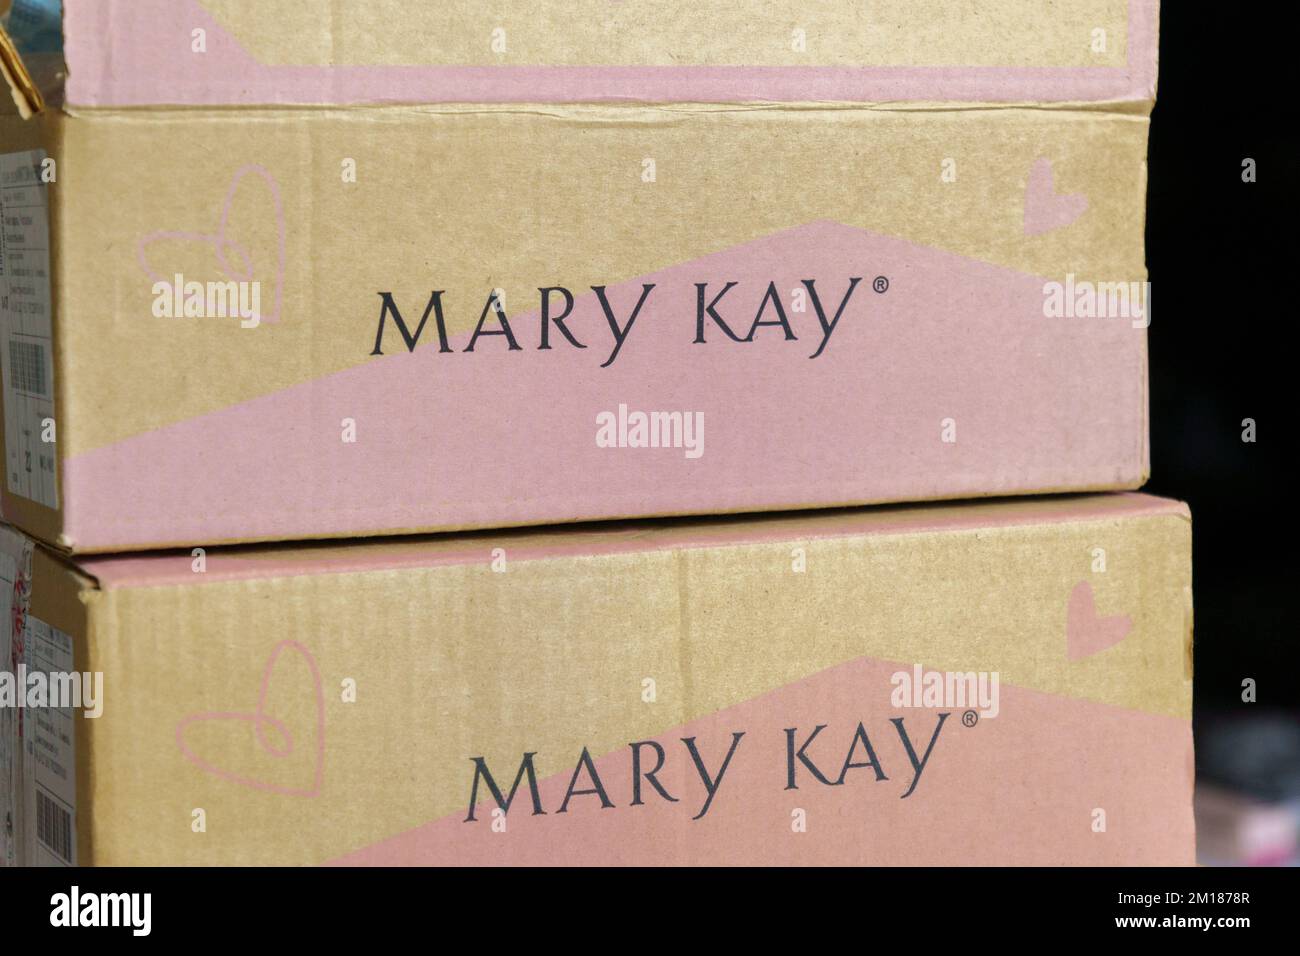 Mary Kay Yellow Concealer -New in box- FREE SHIPPING!!